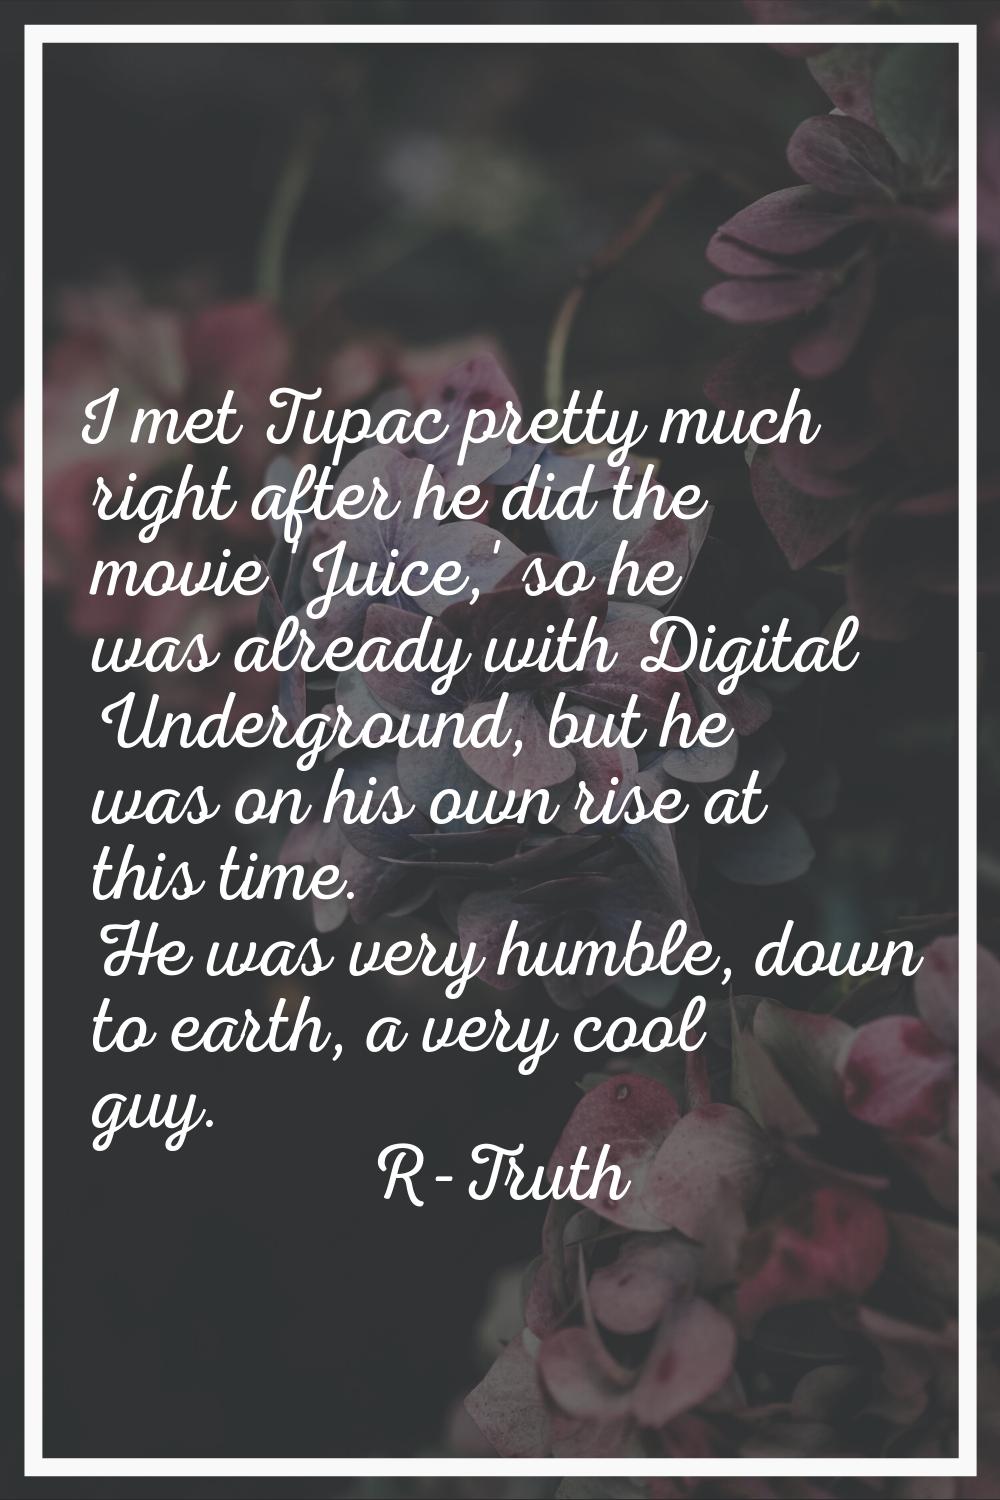 I met Tupac pretty much right after he did the movie 'Juice,' so he was already with Digital Underg